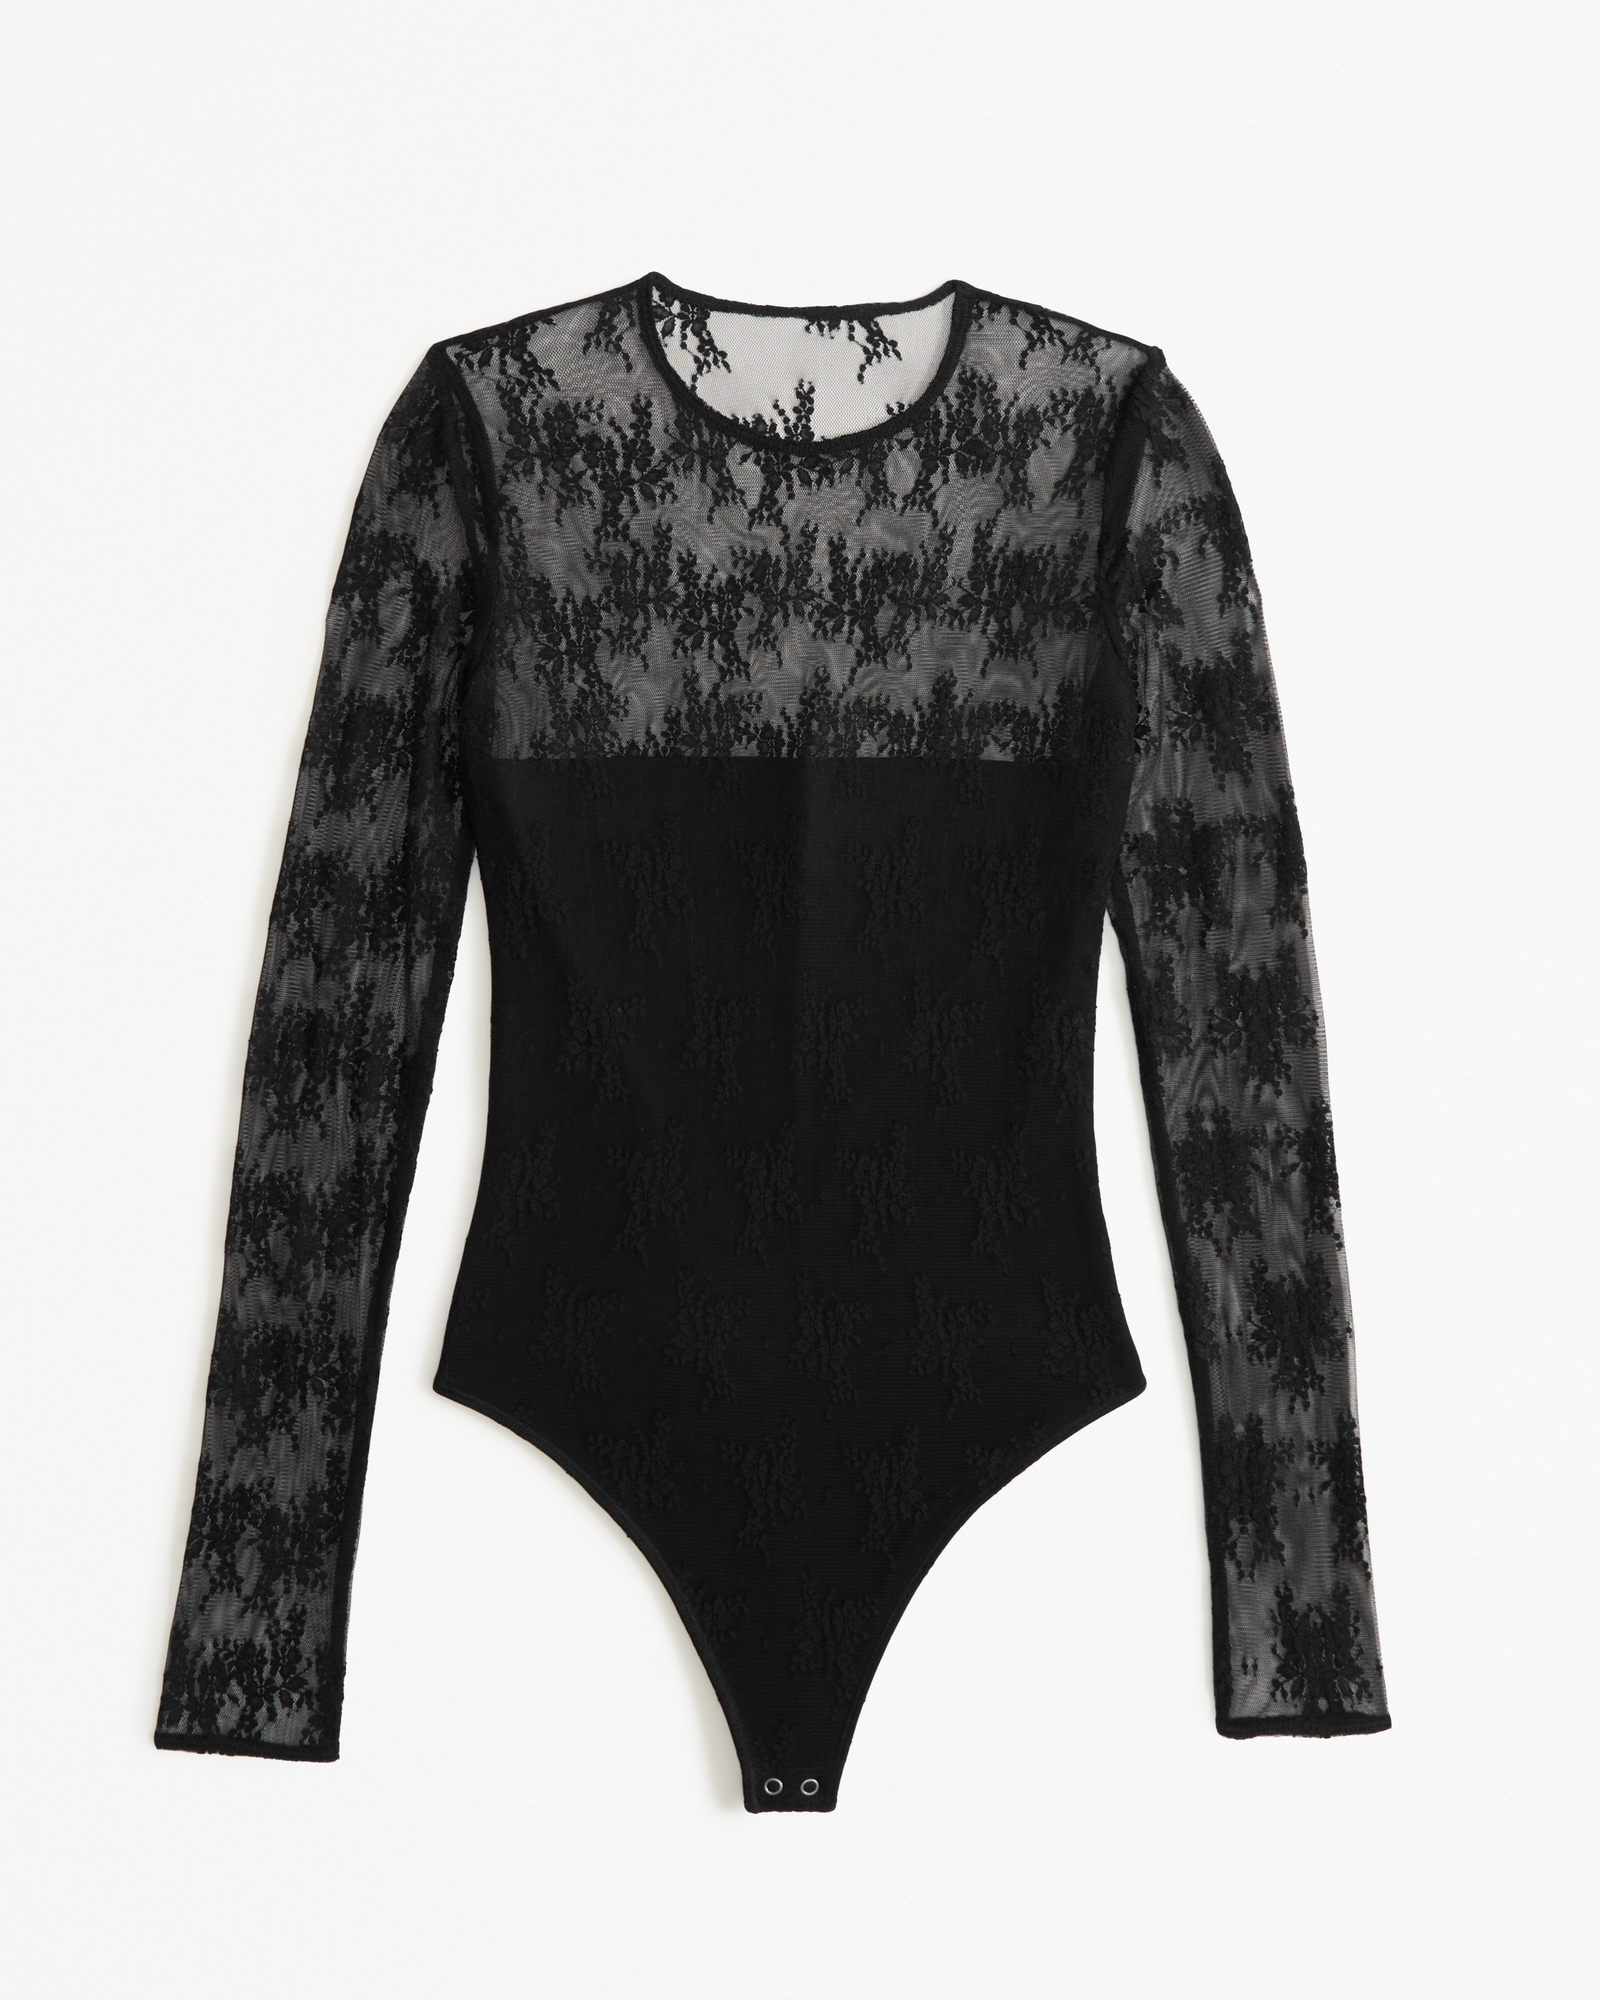 Sheer Me Out Black Lace Long Sleeve Bodysuit  Black lace bodysuit, Lace  bodysuit outfit, Lace top long sleeve